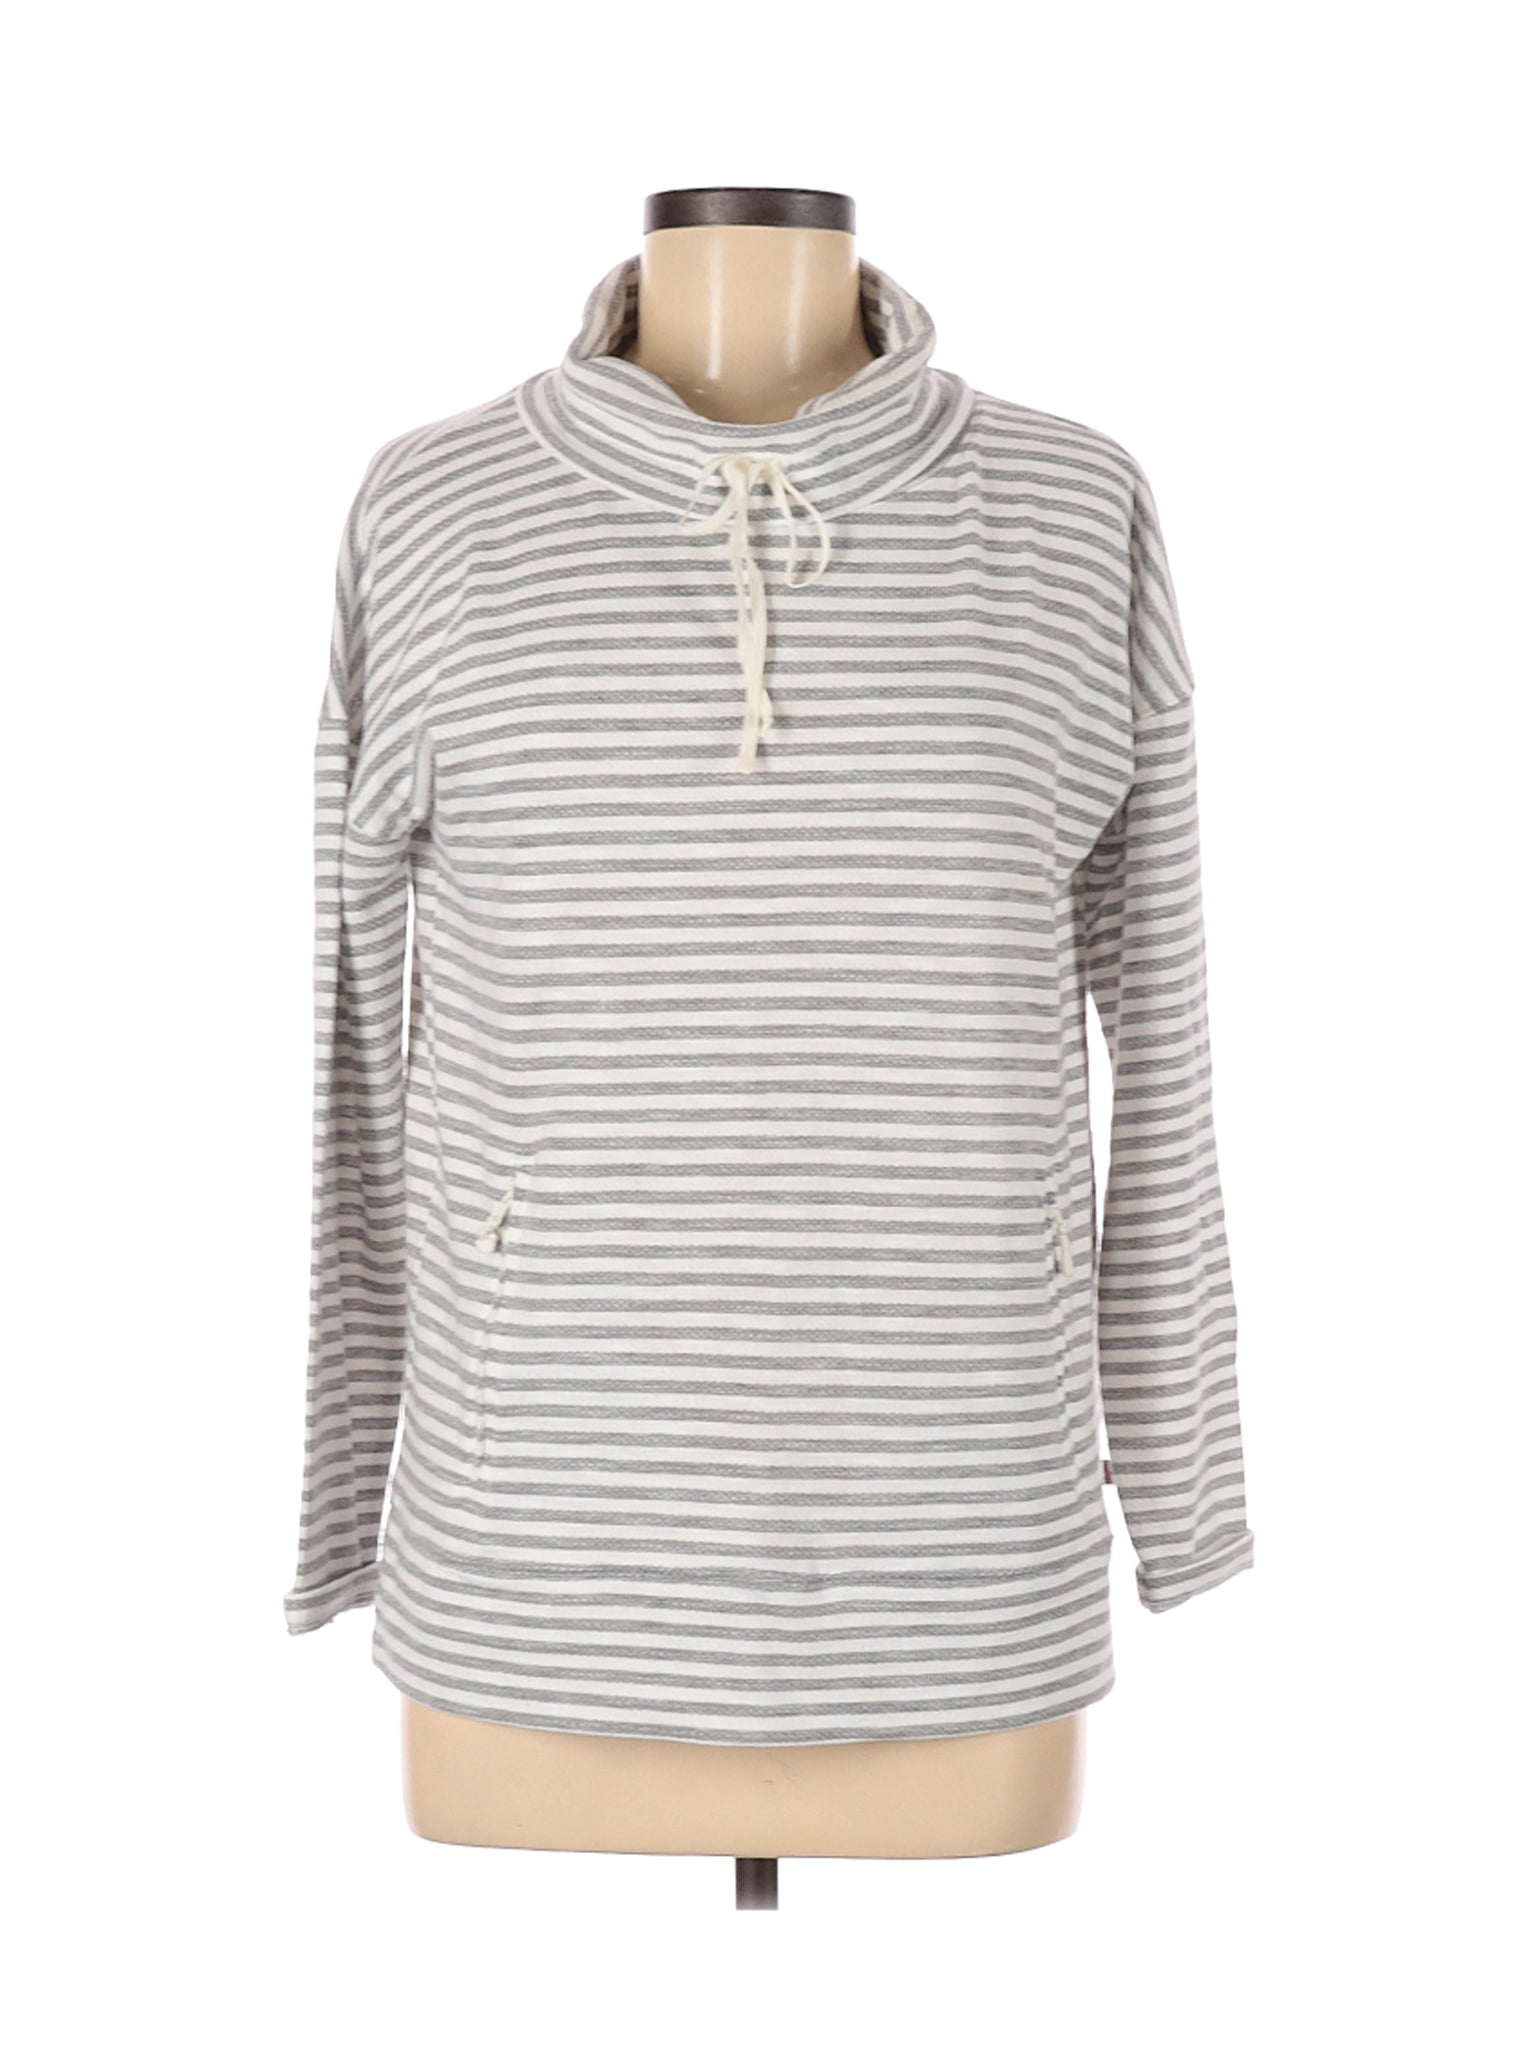 Talbots - Pre-Owned Talbots Women's Size M Petite Pullover Sweater ...